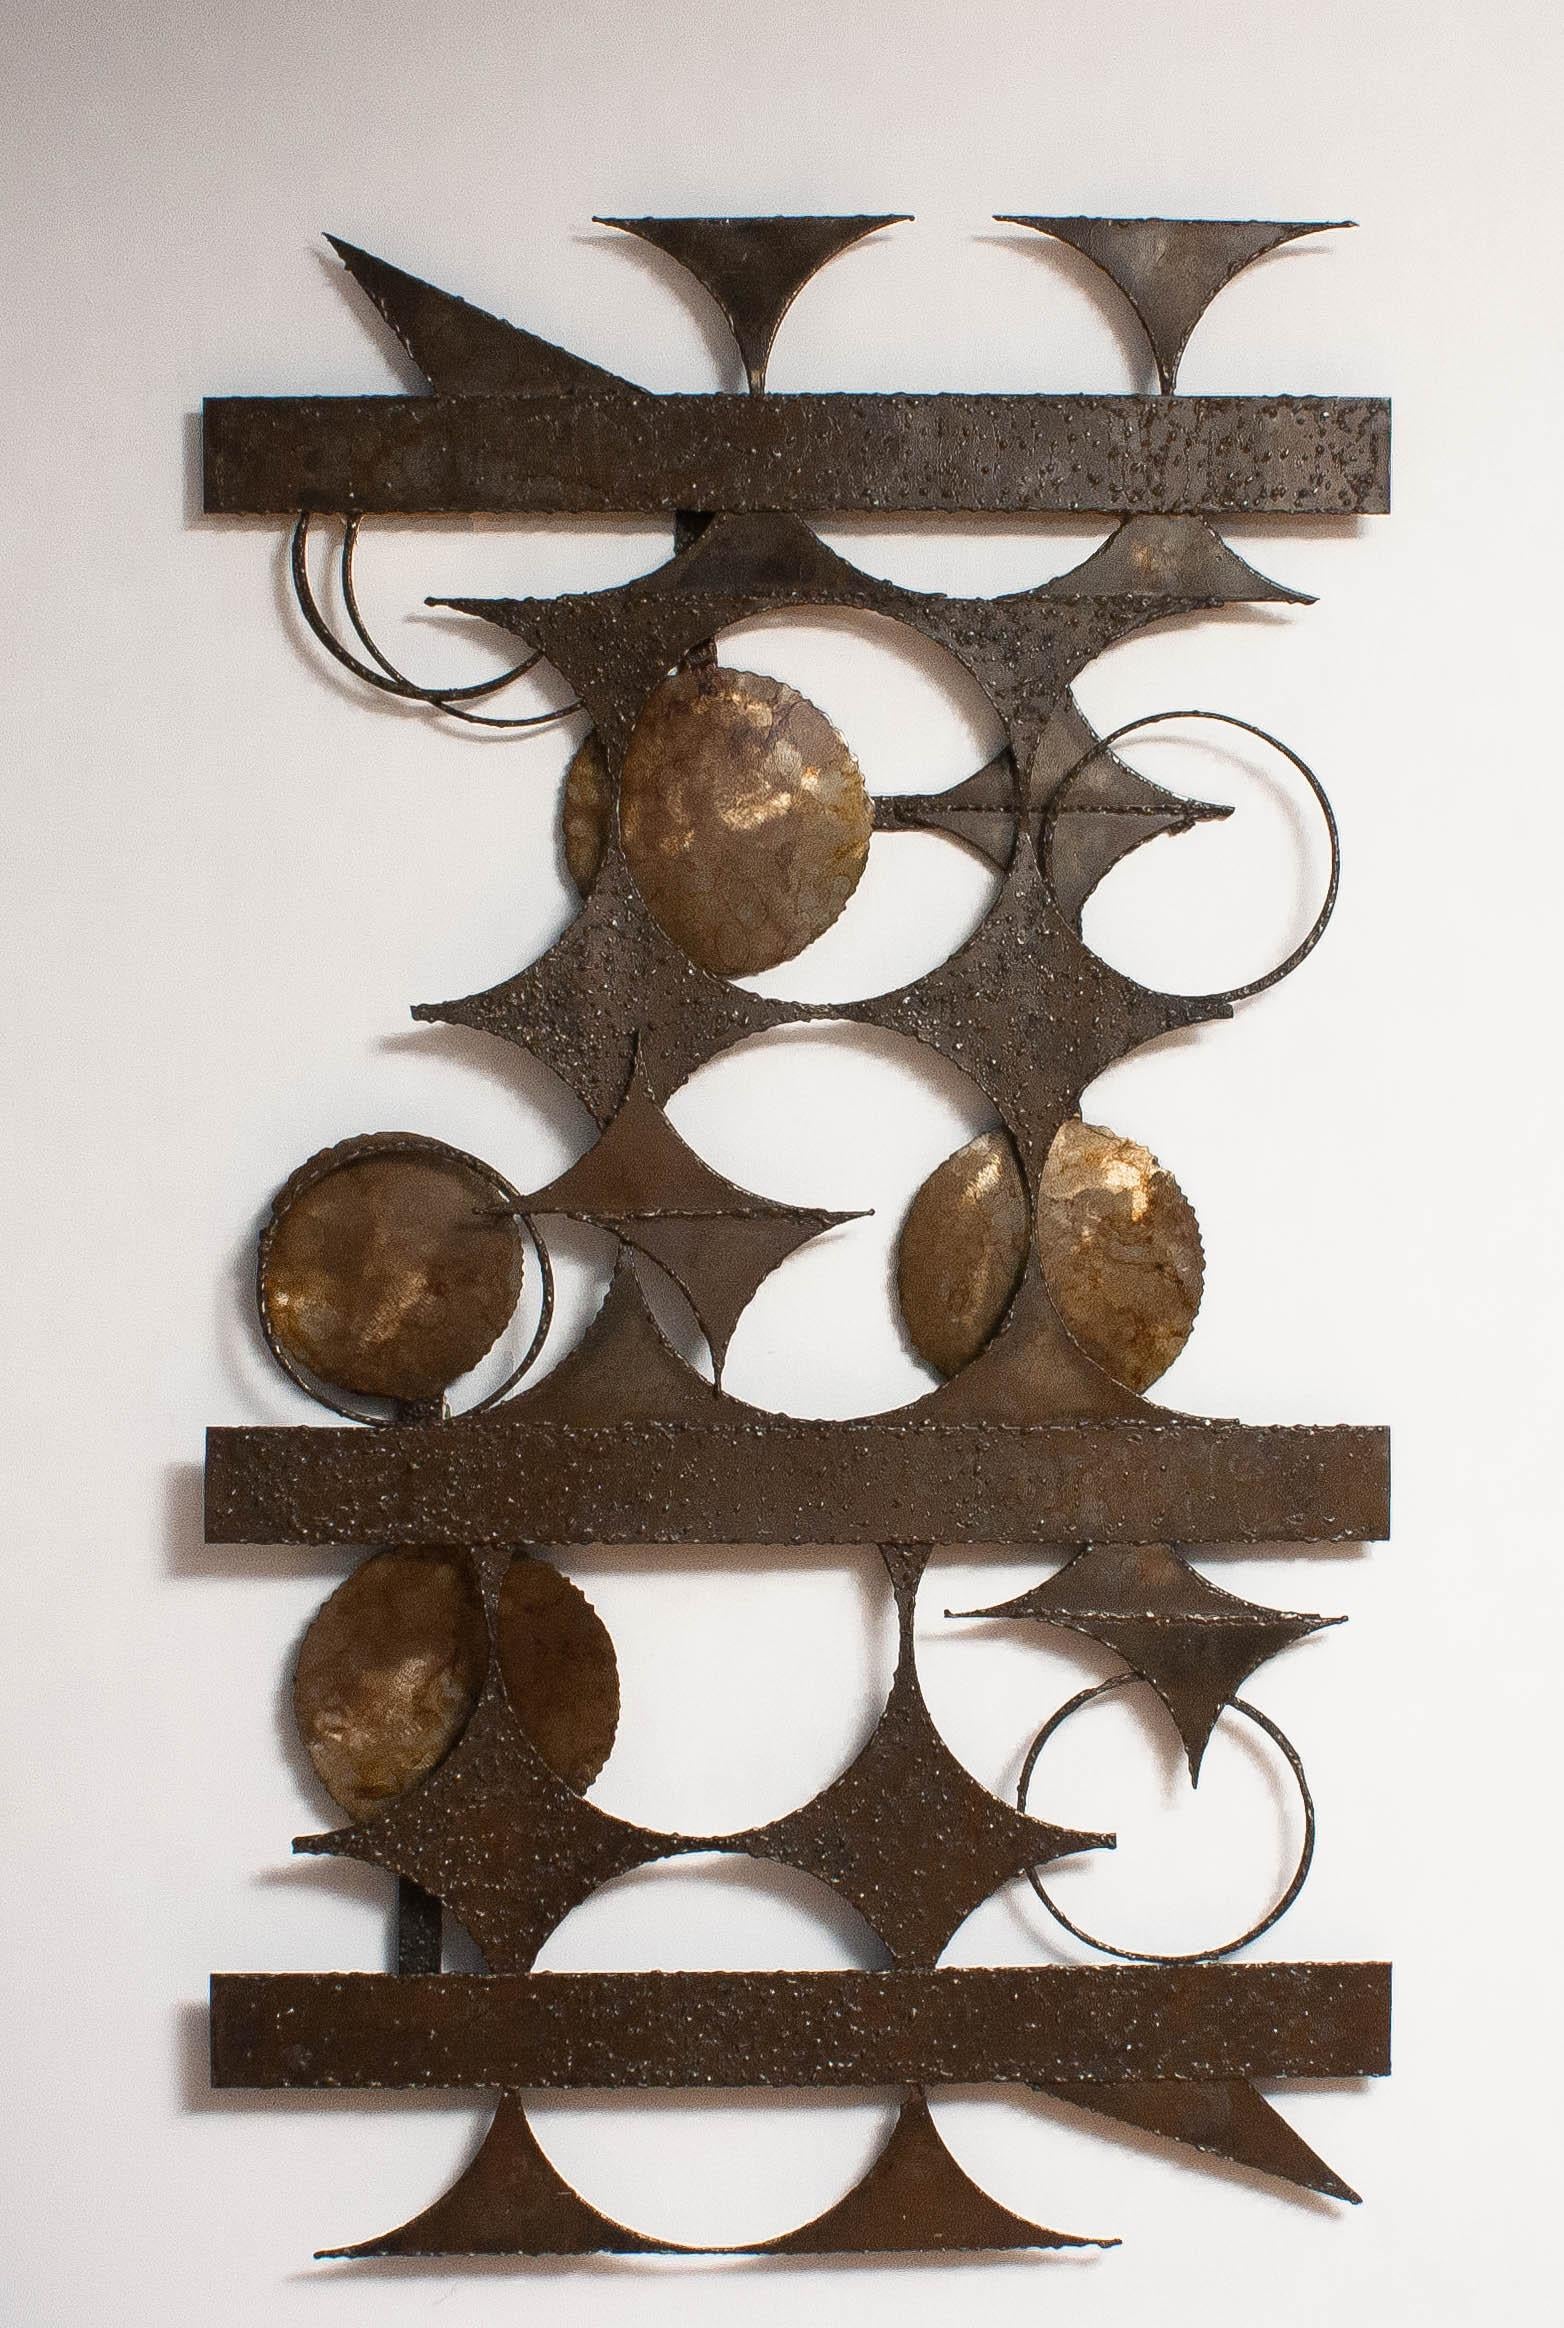 Big / large Brutalist wall sculpture made of mixed metals and techniques designed and made by Henrik Horst from Denmark in the 70's.
This sculpture can de horizontal as well as vertical.